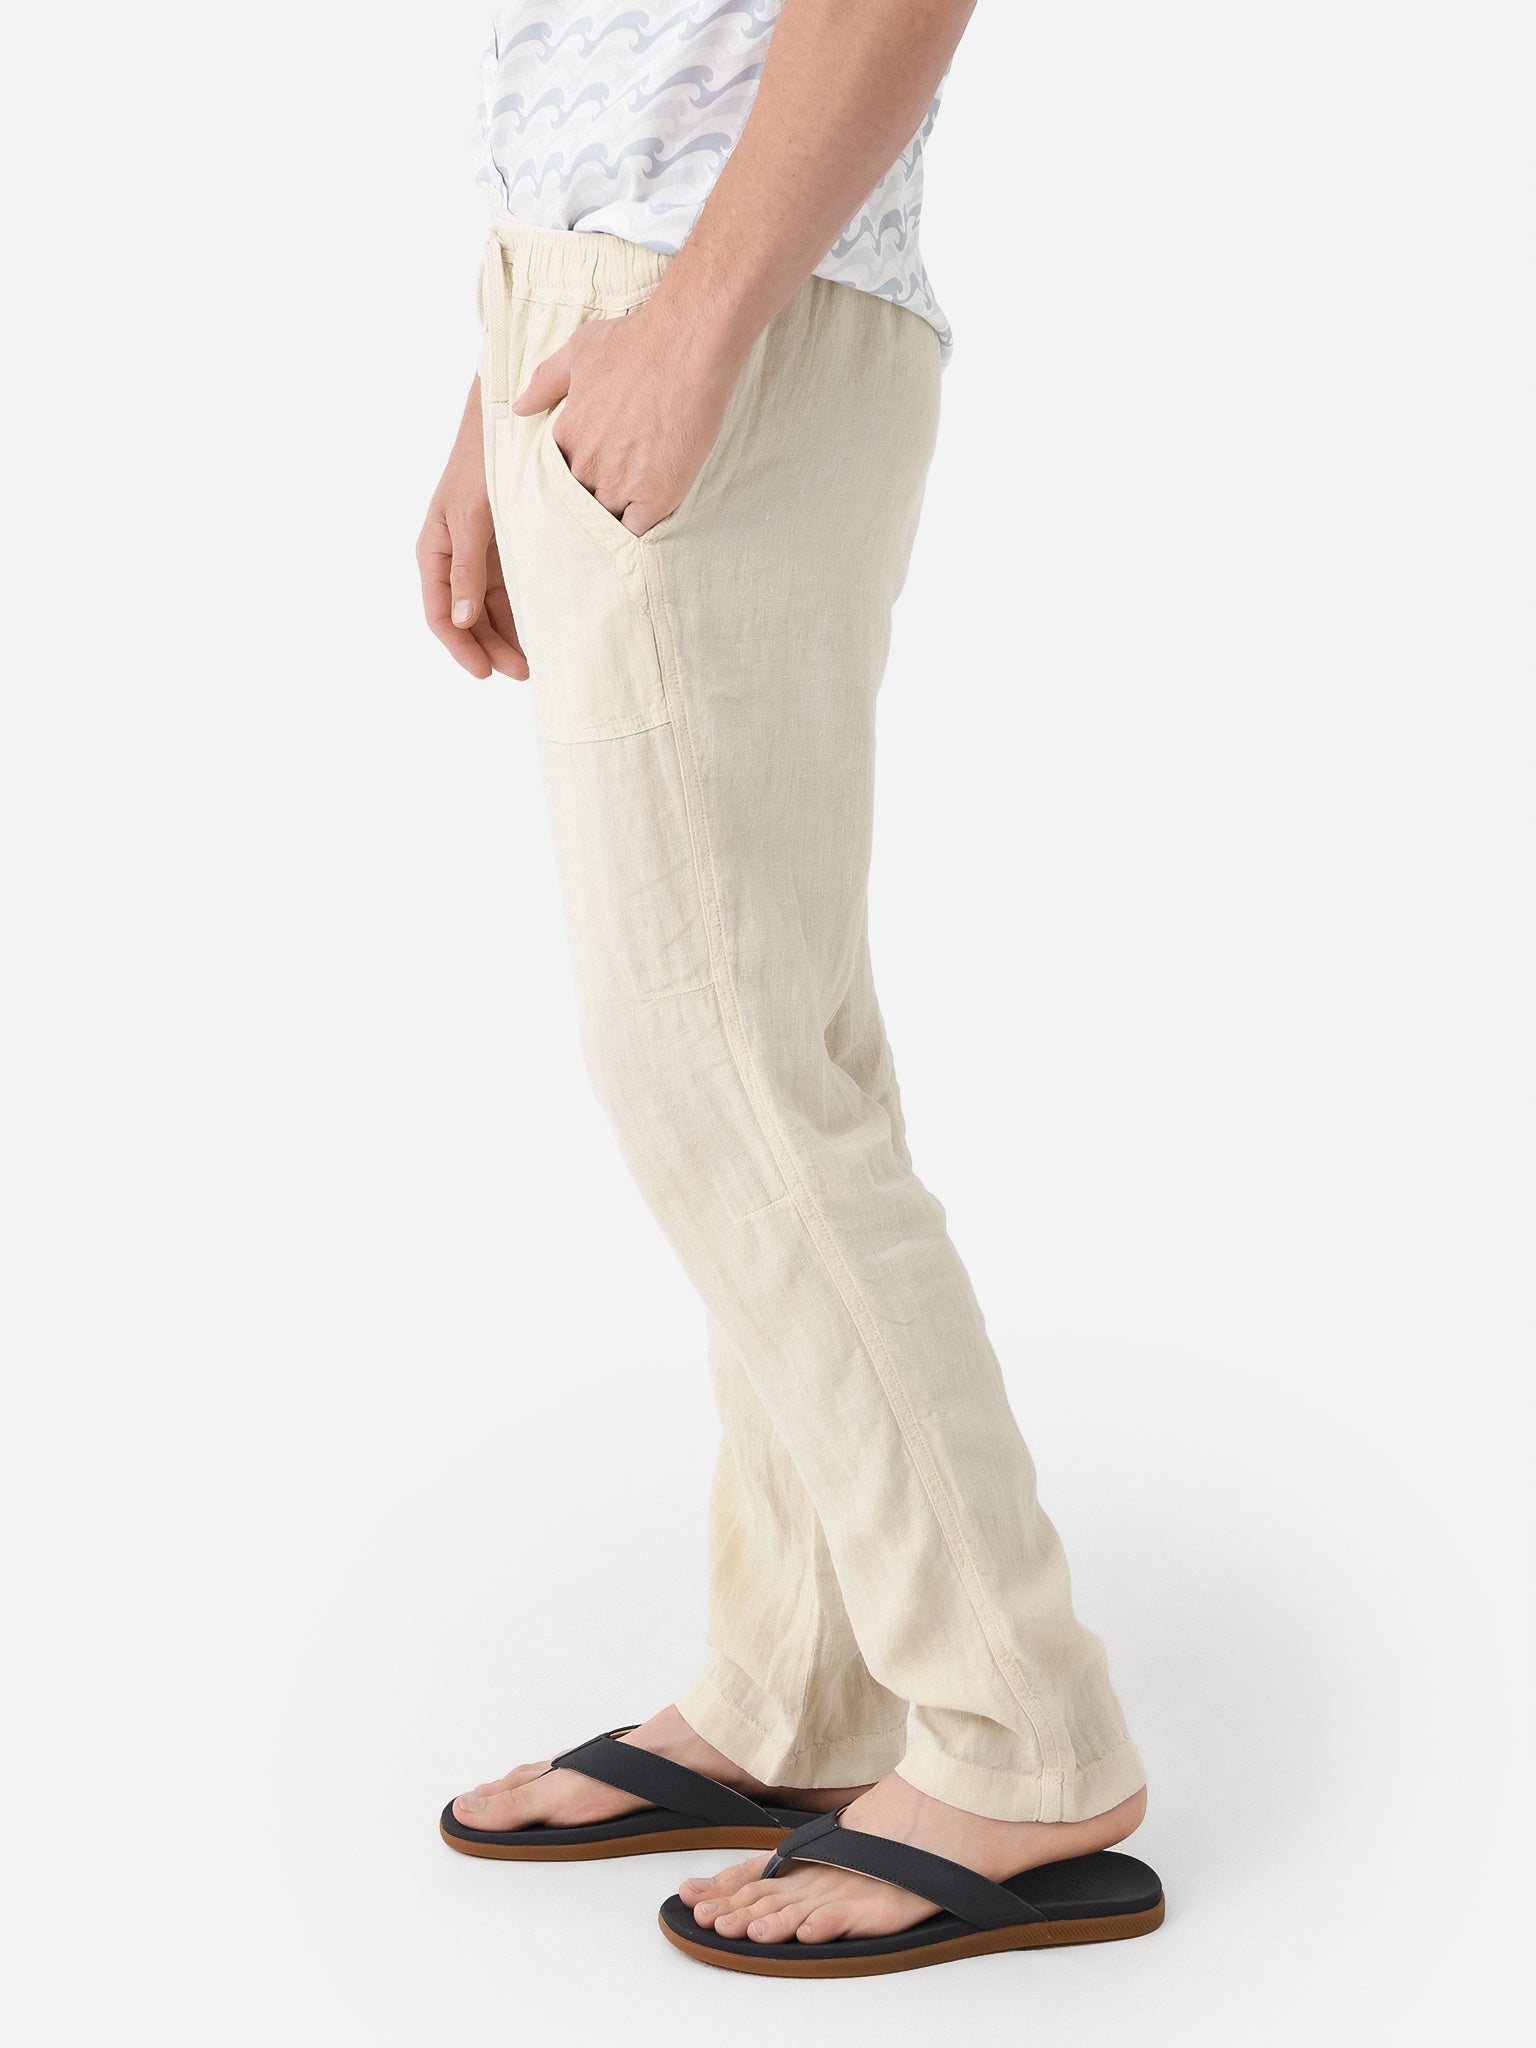 Riviera Linen Pant in Oatmeal | Academy Brand